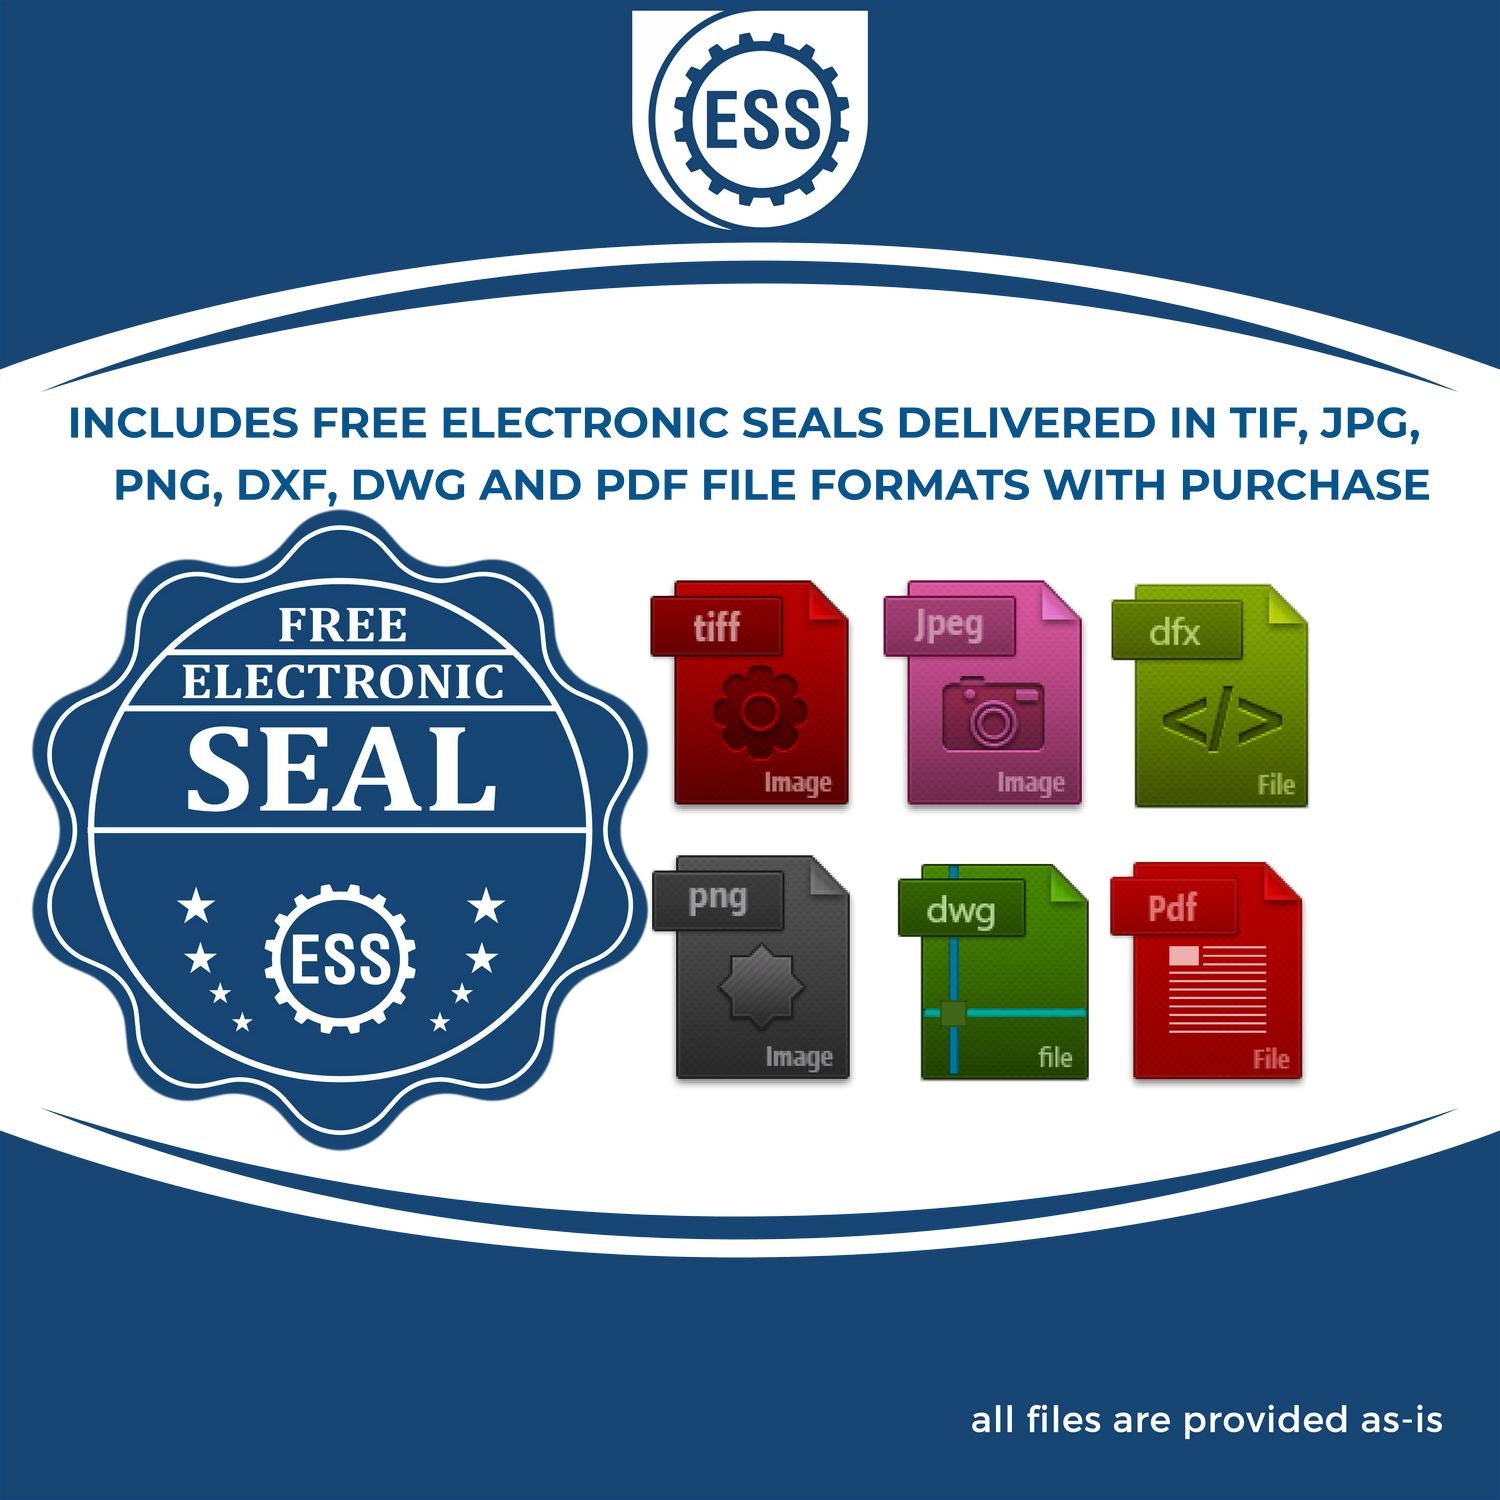 An infographic for the free electronic seal for the New Mexico Professional Engineer Seal Stamp illustrating the different file type icons such as DXF, DWG, TIF, JPG and PNG.